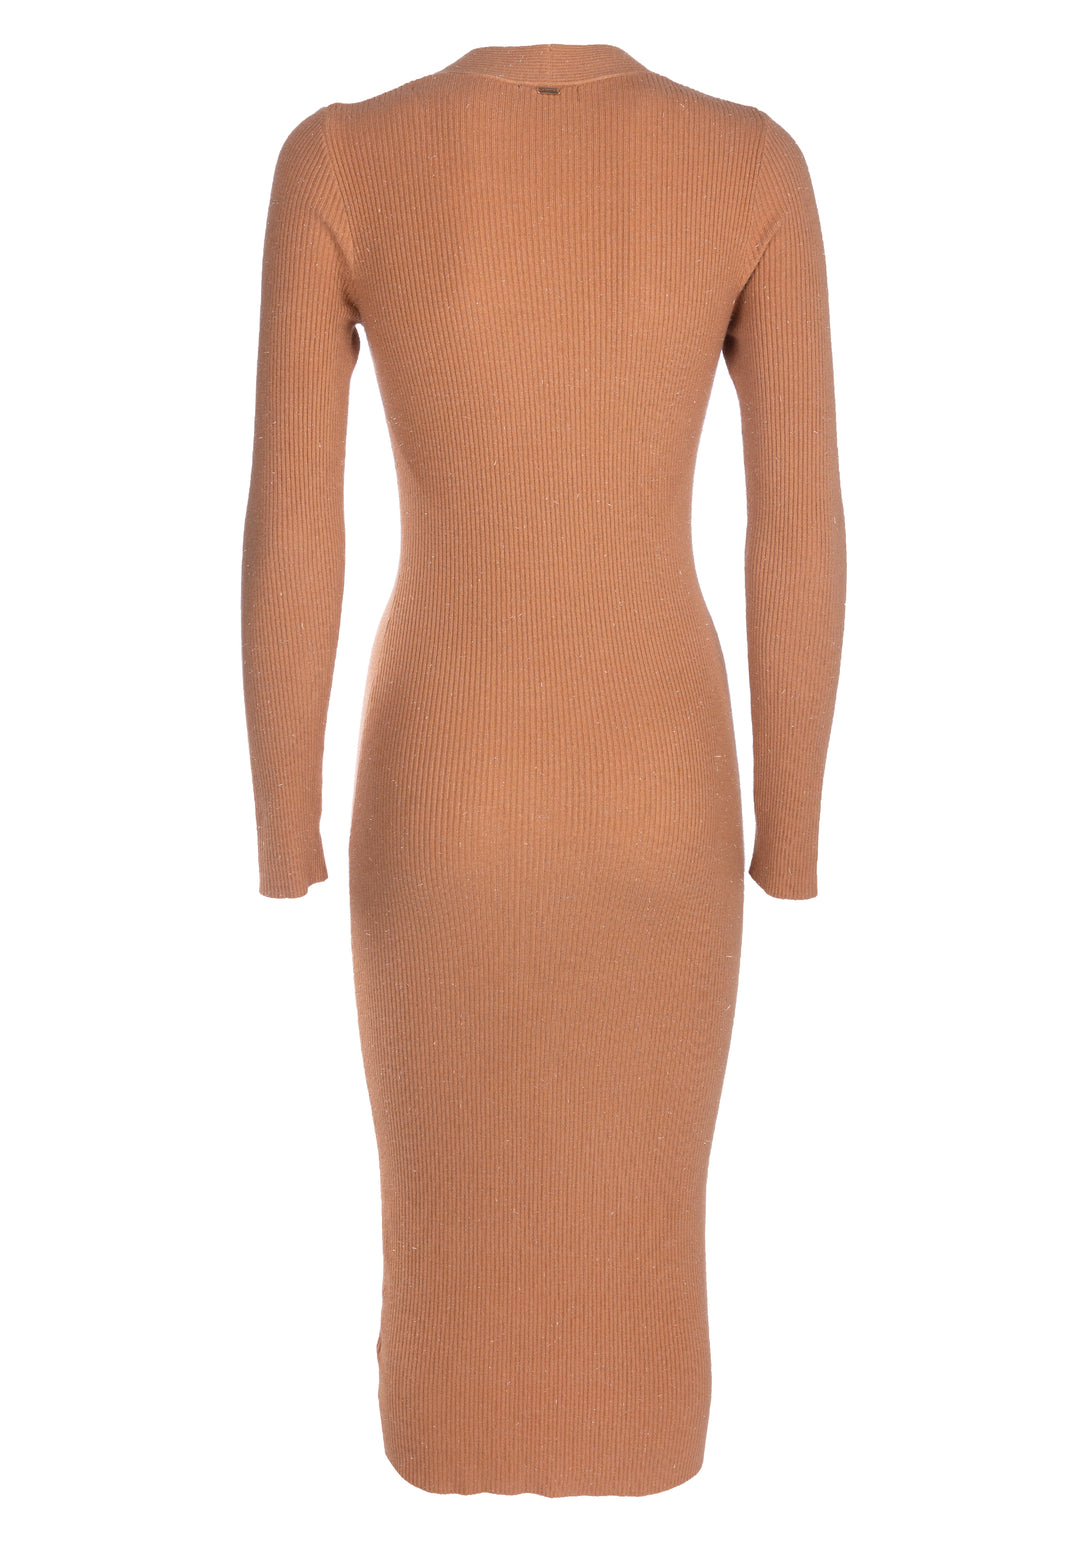 Knitted dress slim fit middle length